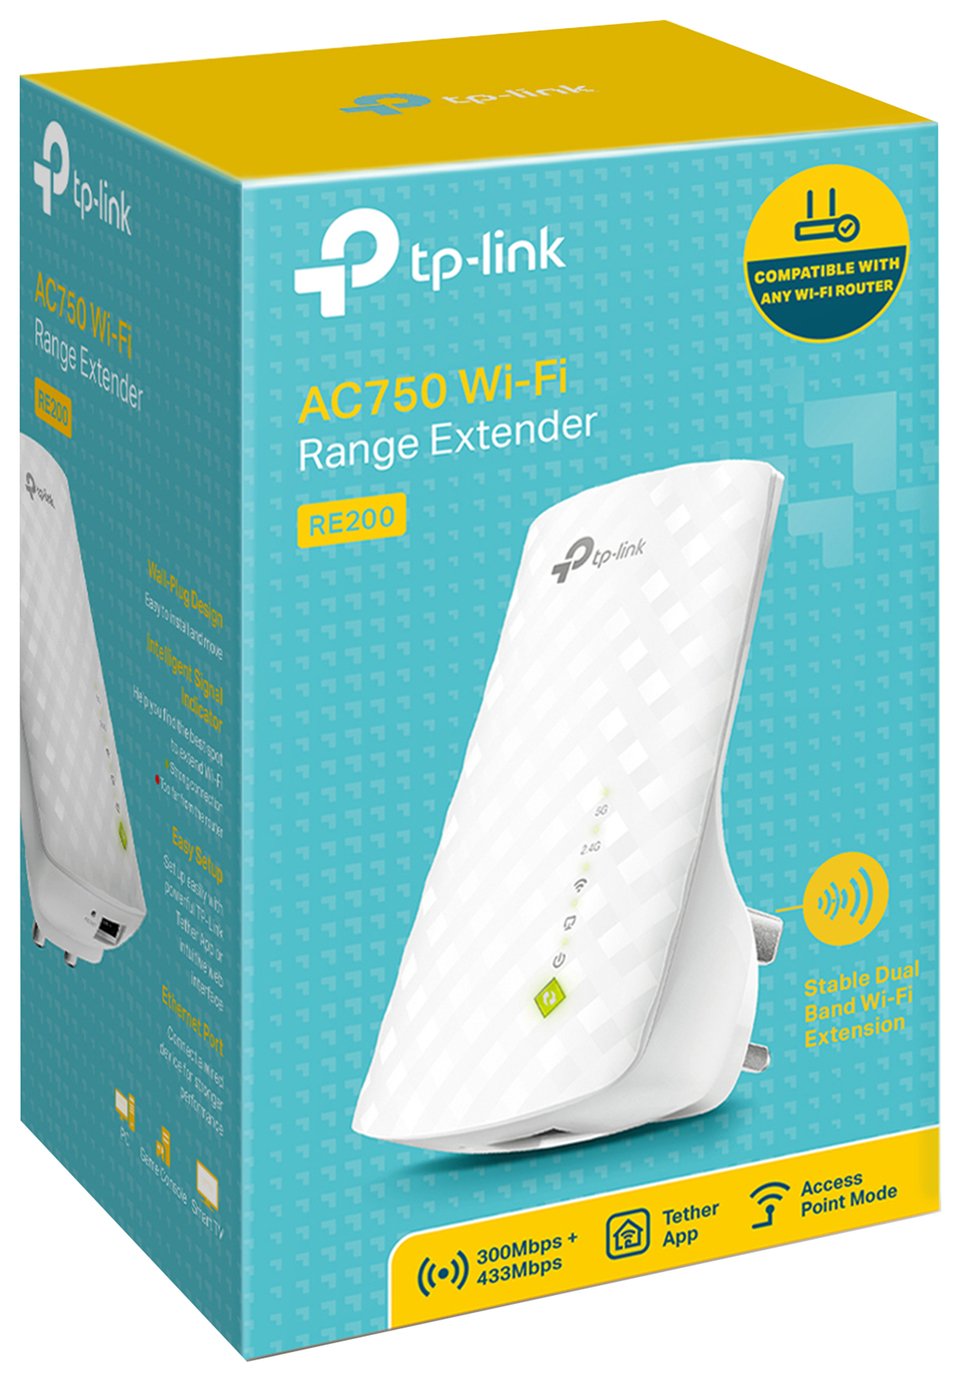 TP-Link AC750 Dual Band Wi-Fi Range Extender & Booster Review